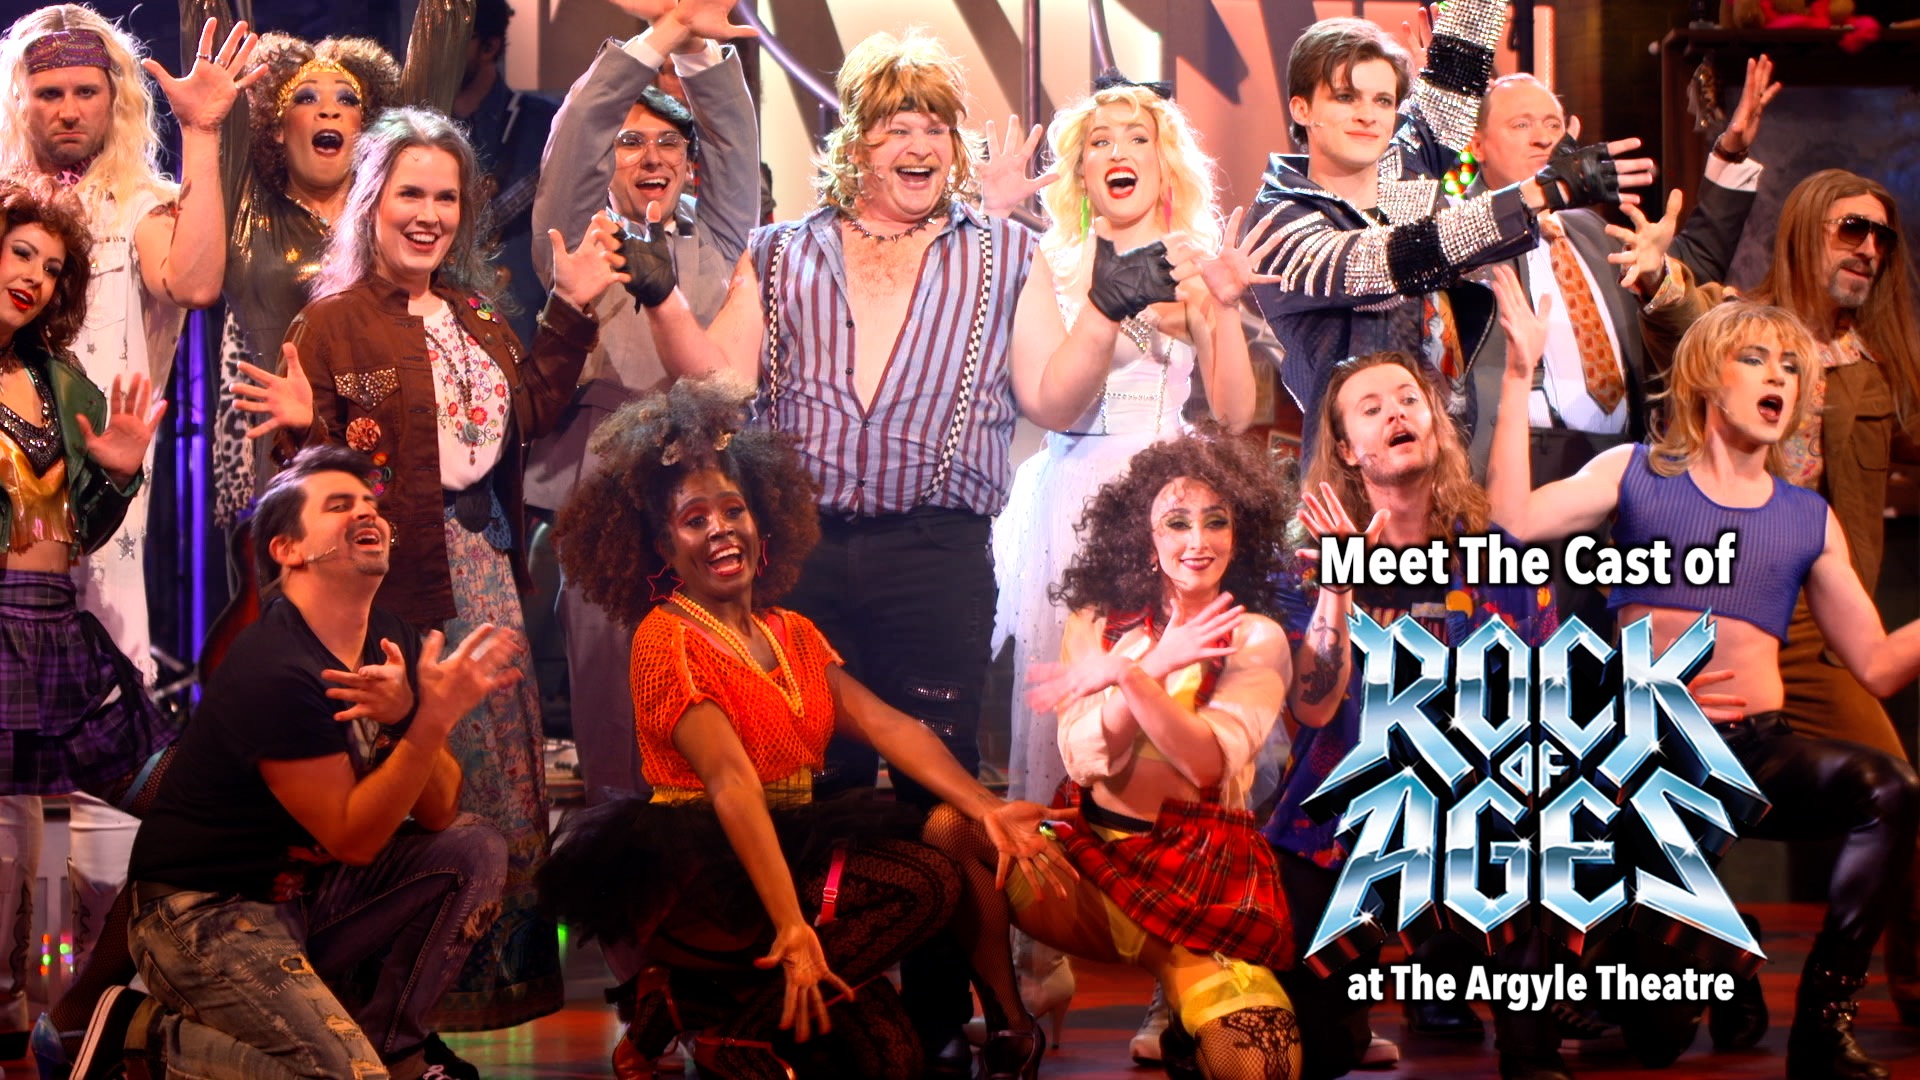 Meet The Cast of Rock of Ages at the Argyle Theatre